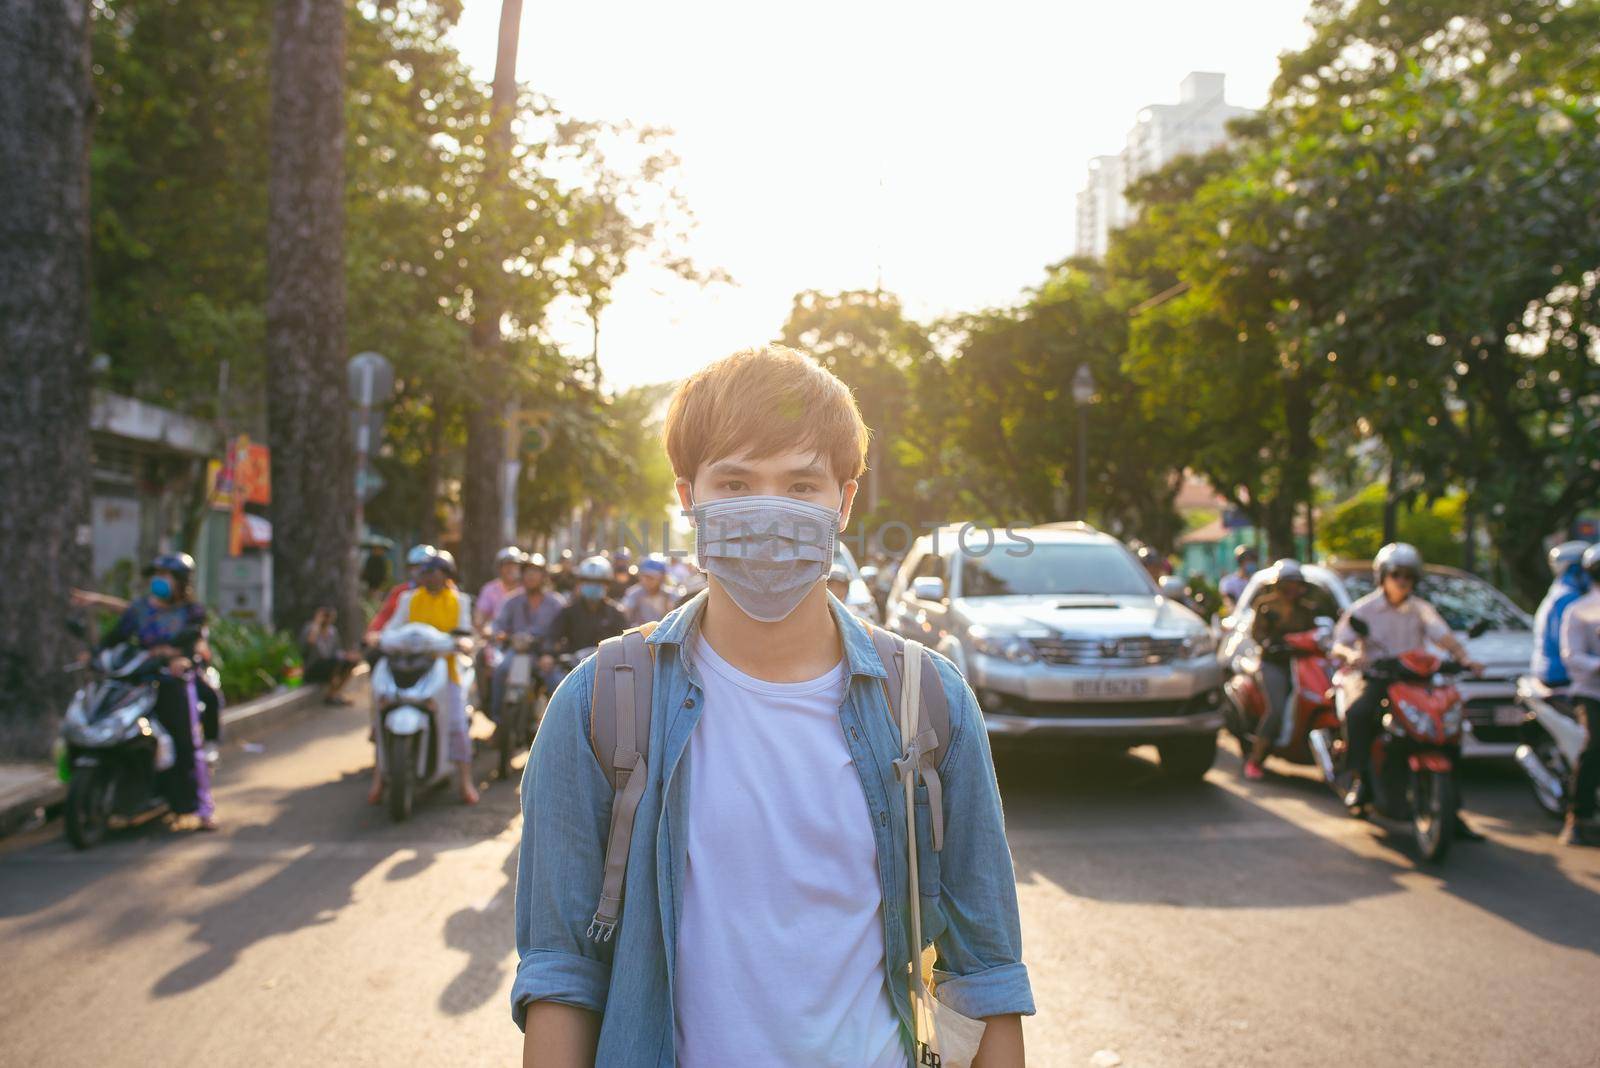 Asian man in the street wearing protective masks by makidotvn